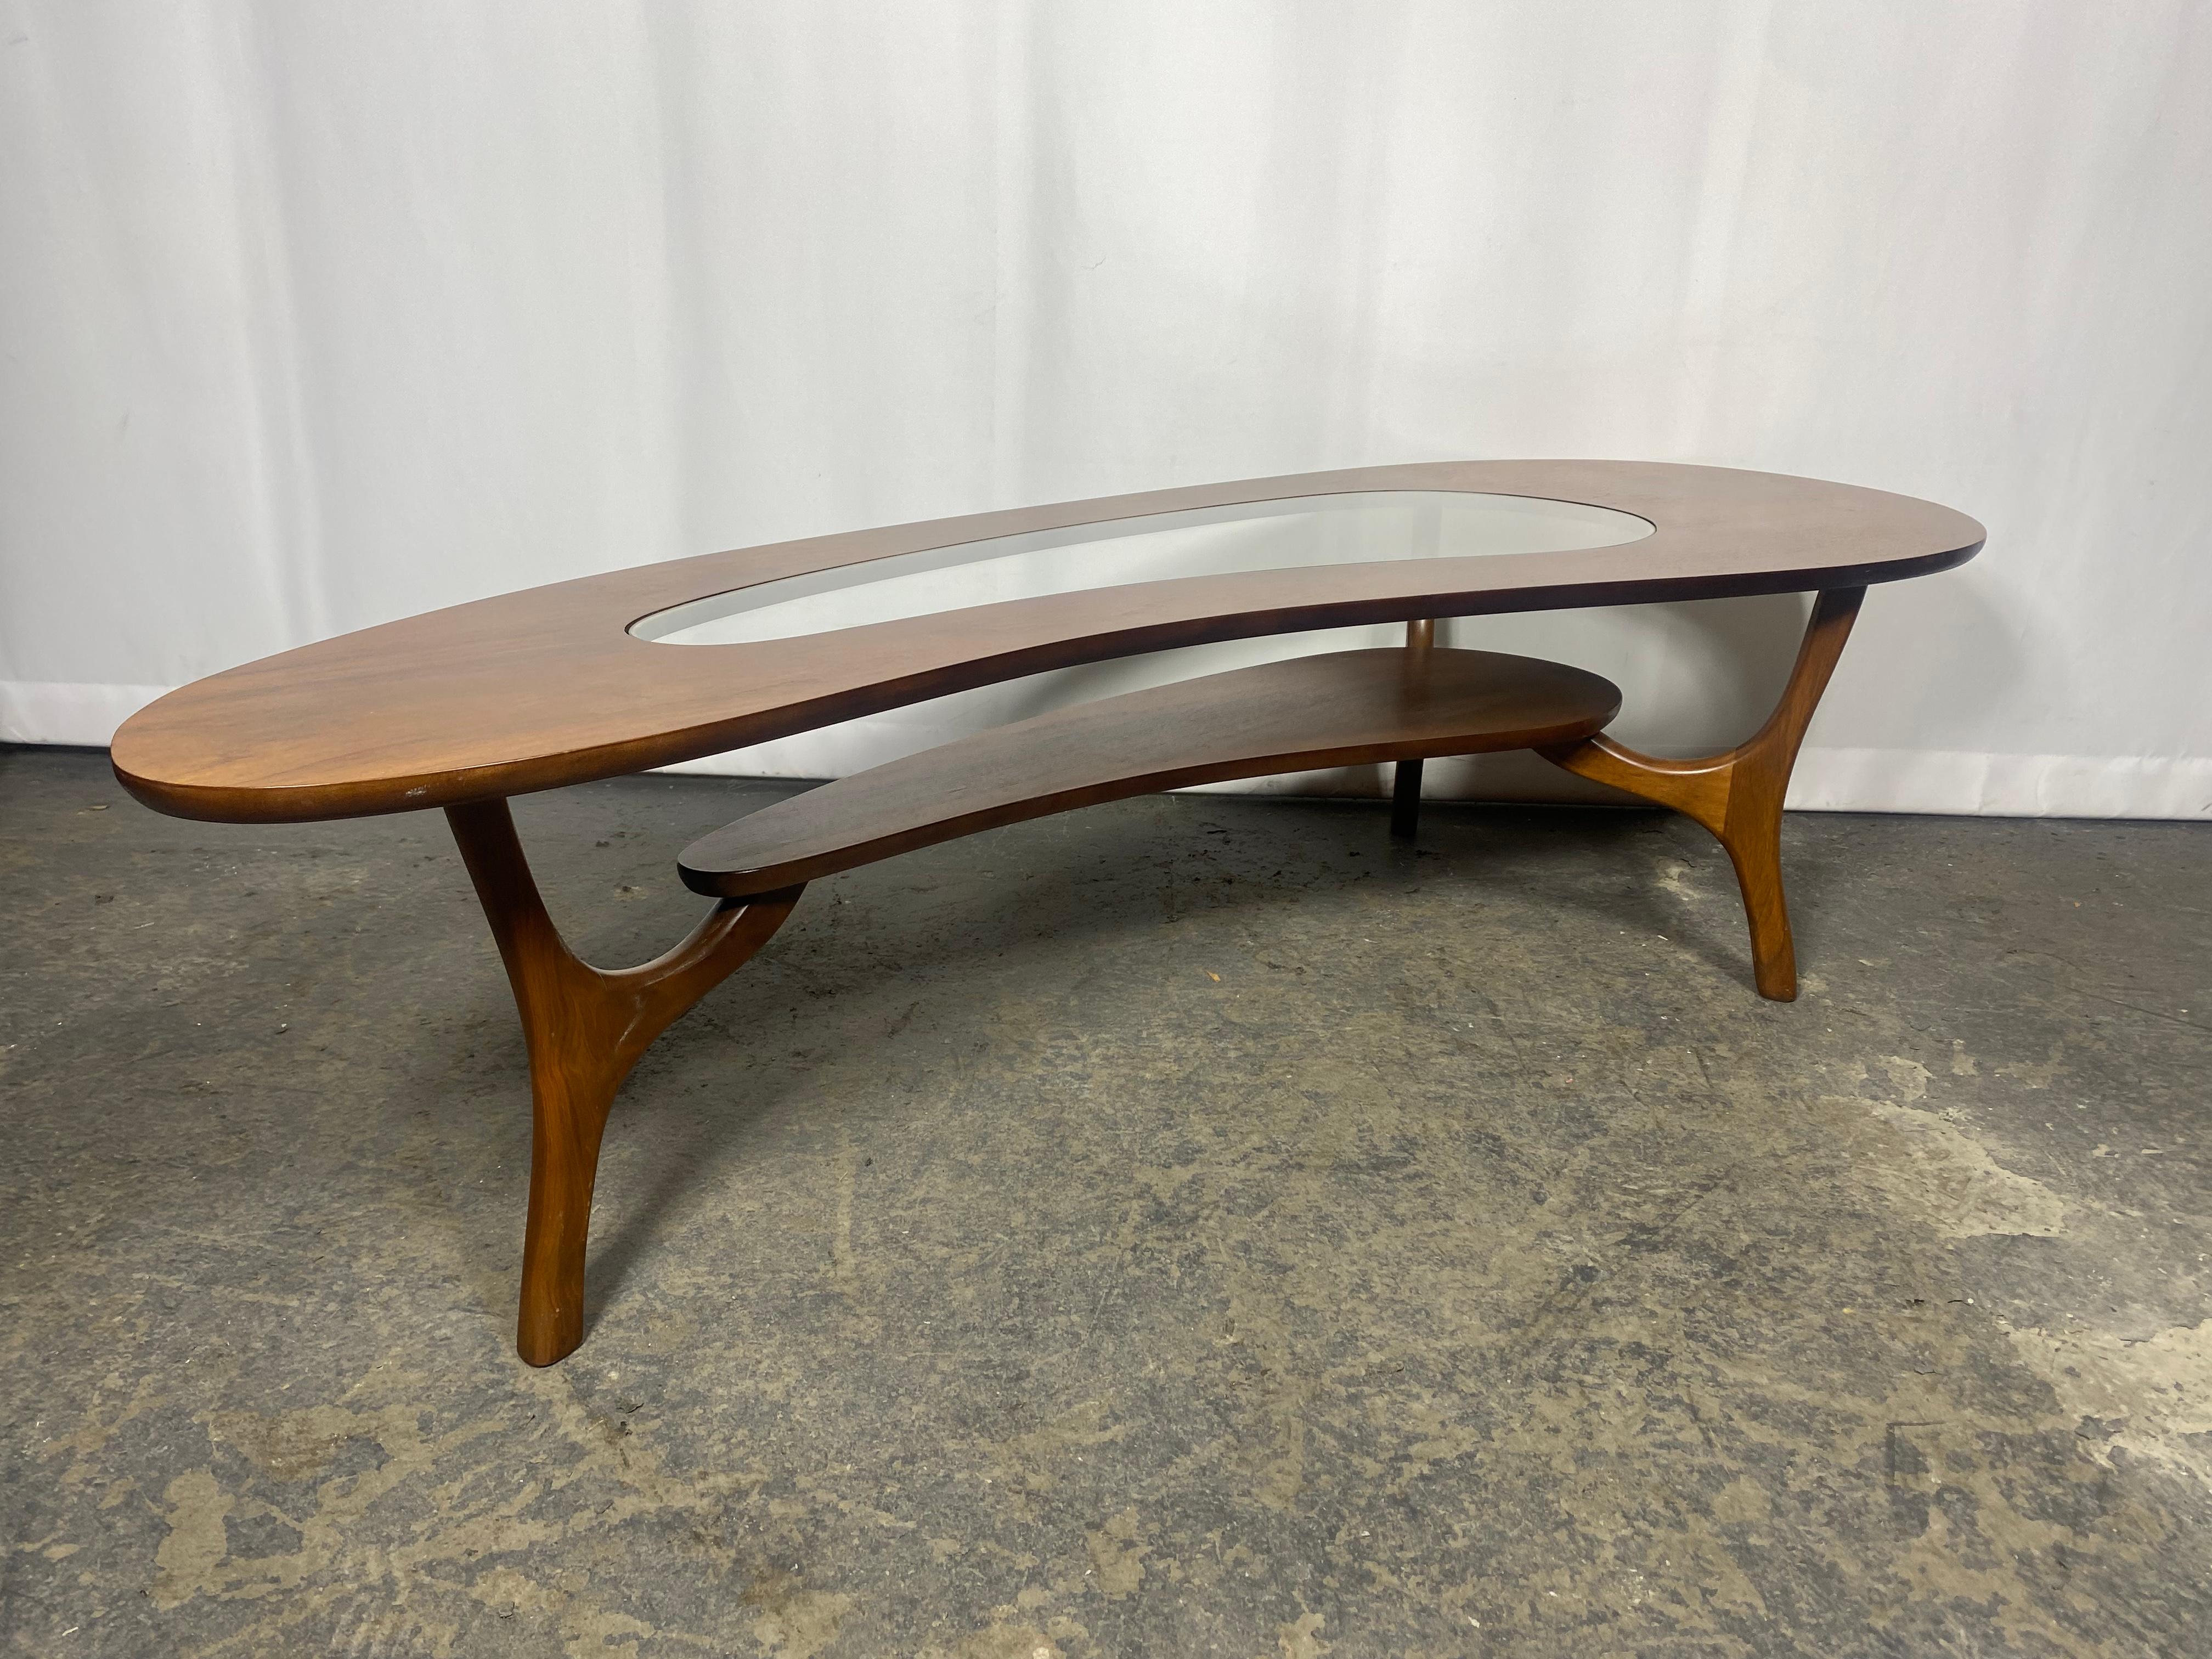 c.1960 kidney shaped, 2 tiered coffee table with sculptural legs & glass insert  In Good Condition For Sale In Buffalo, NY